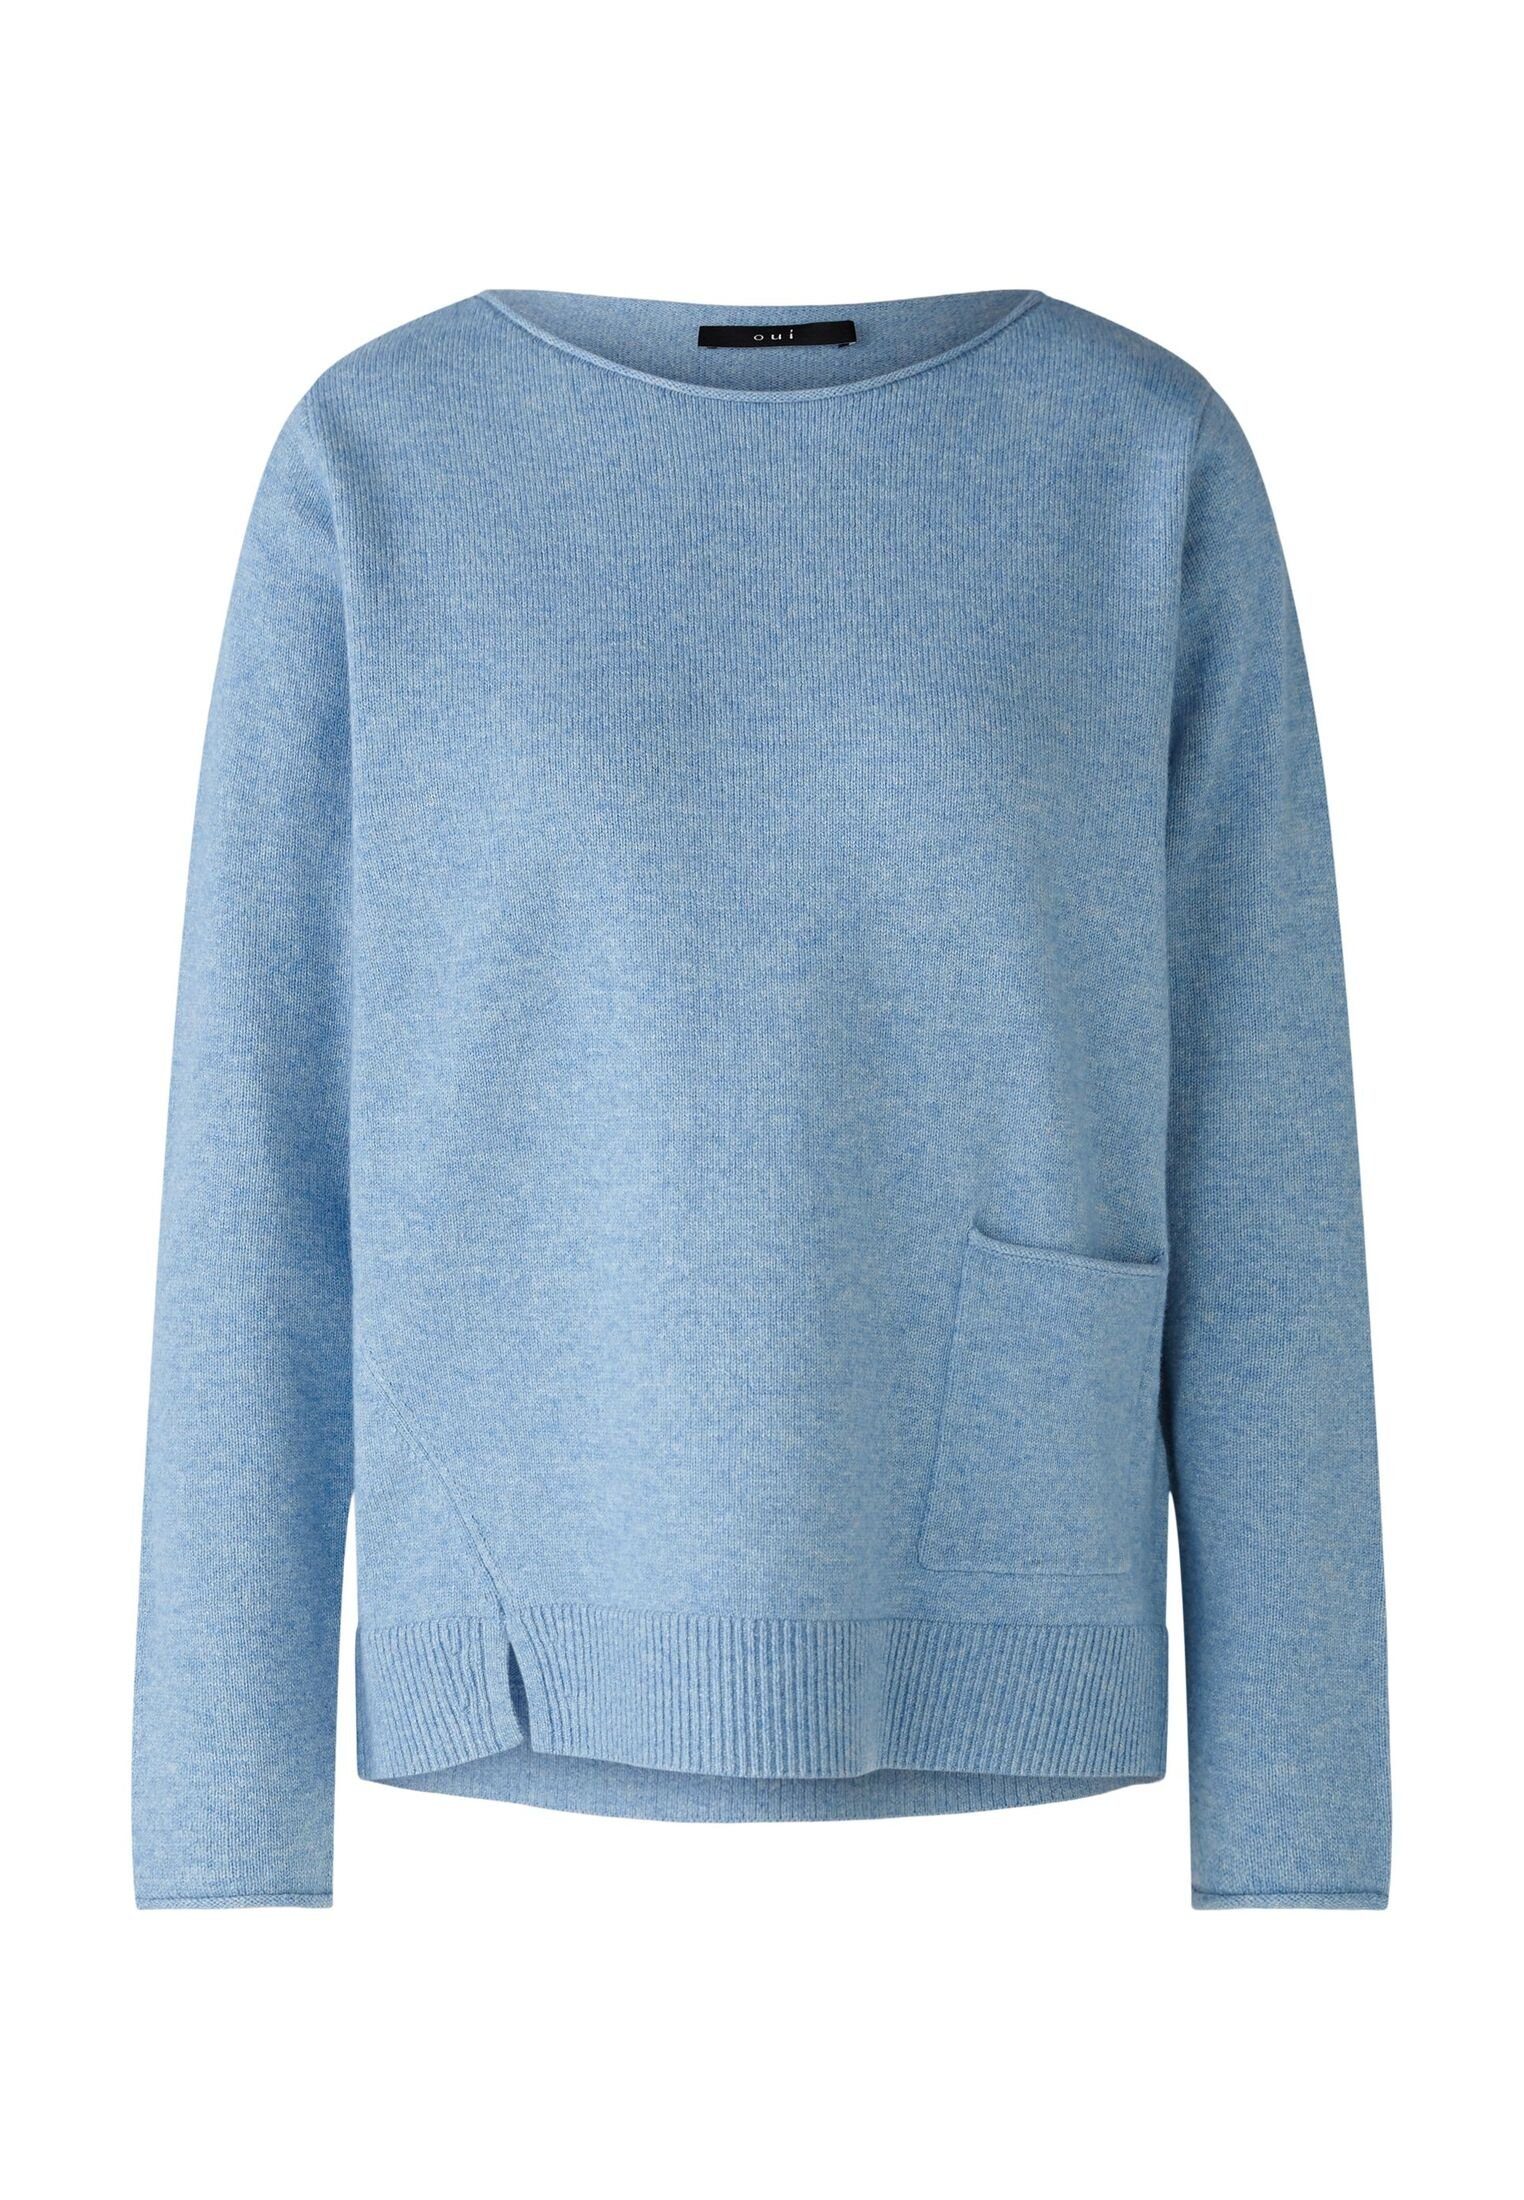 Oui Rundhalspullover Pullover Wolle - Modalmischung sky blue